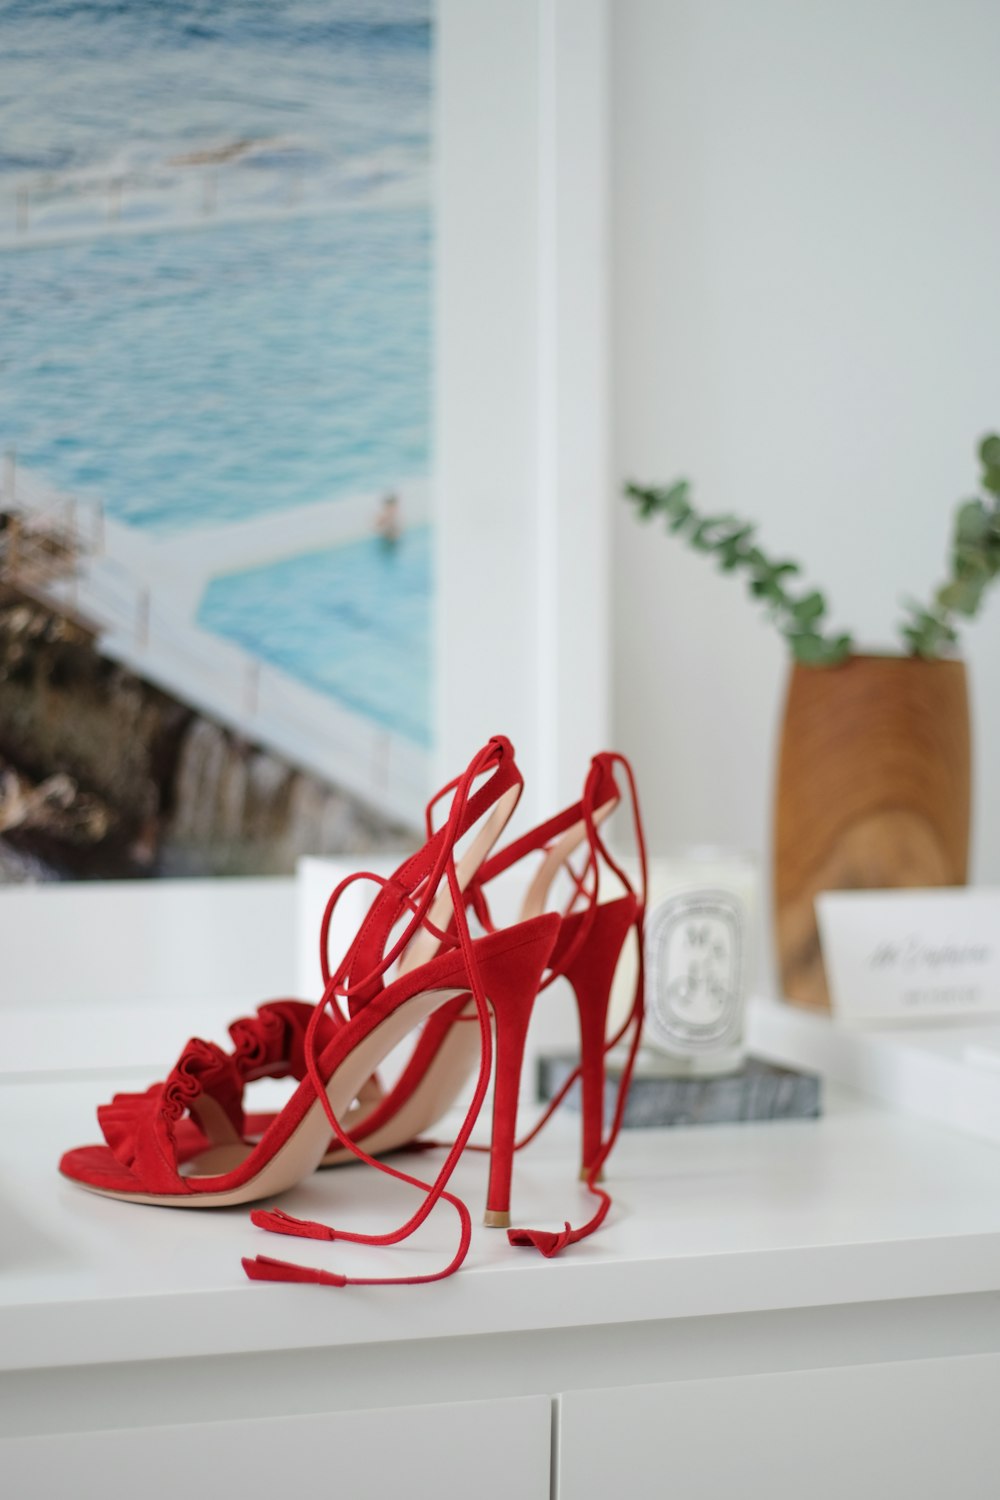 Red Heels Pictures | Download Free Images on Unsplash